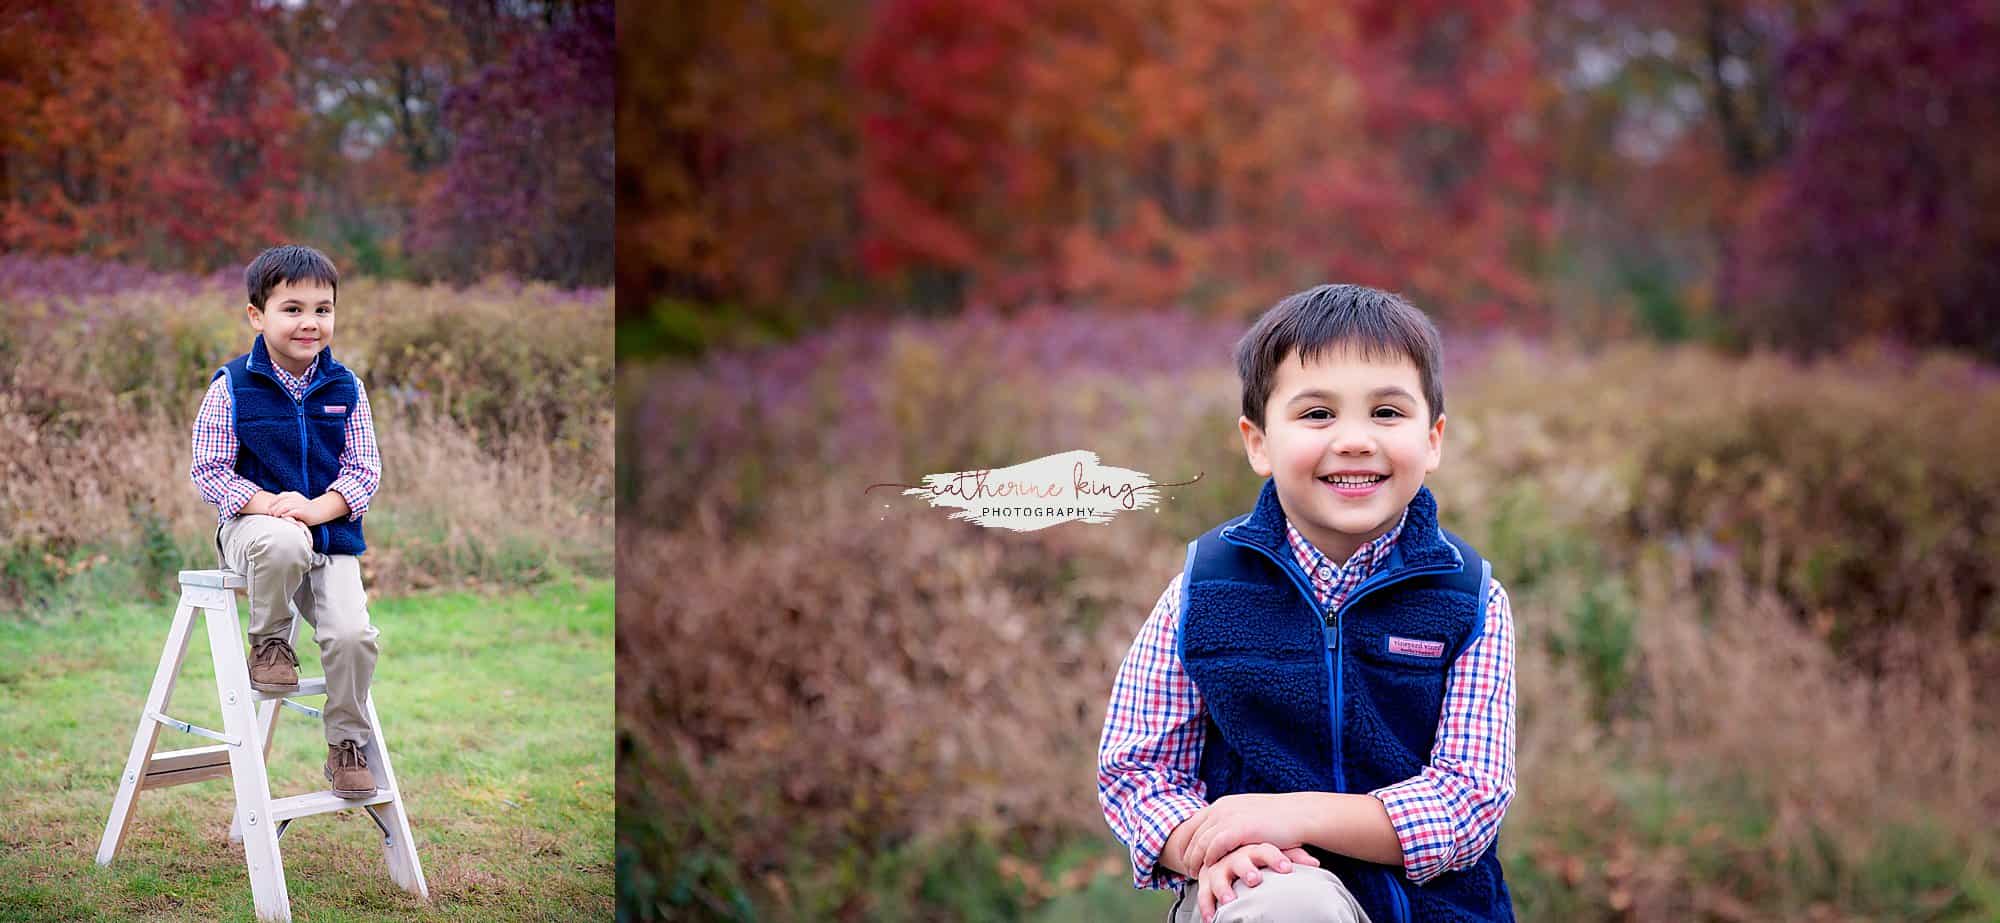 family photography session with fall foliage in madison ct